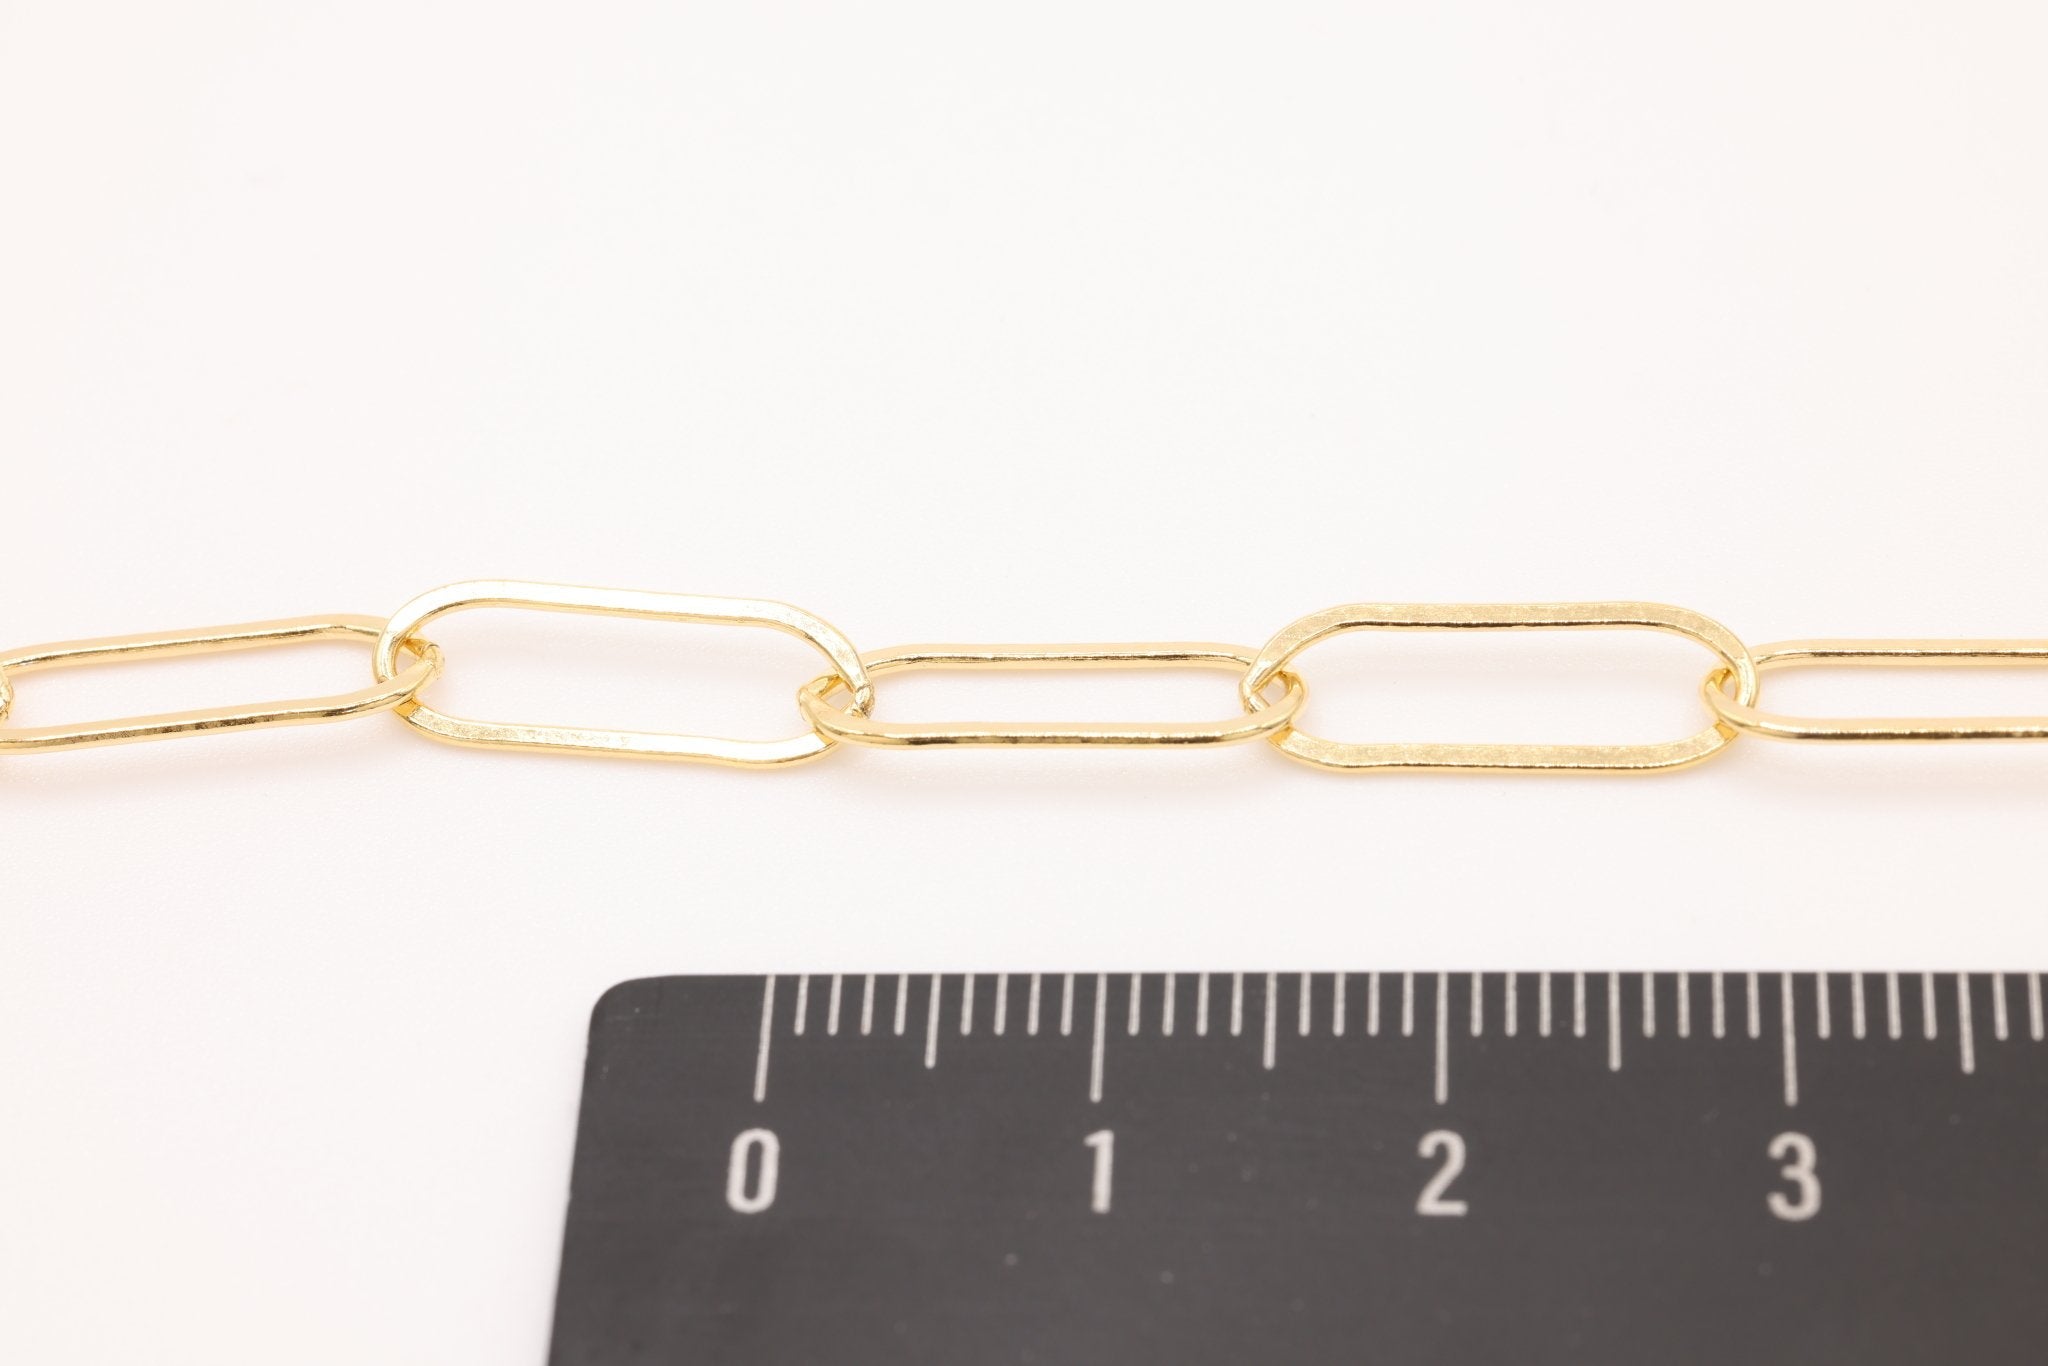 6mm x 15mm Drawn Flat Cable Chain, 14K Gold-Filled, Spool or Footage Rectangle Chain Link Paperclip Chain - HarperCrown